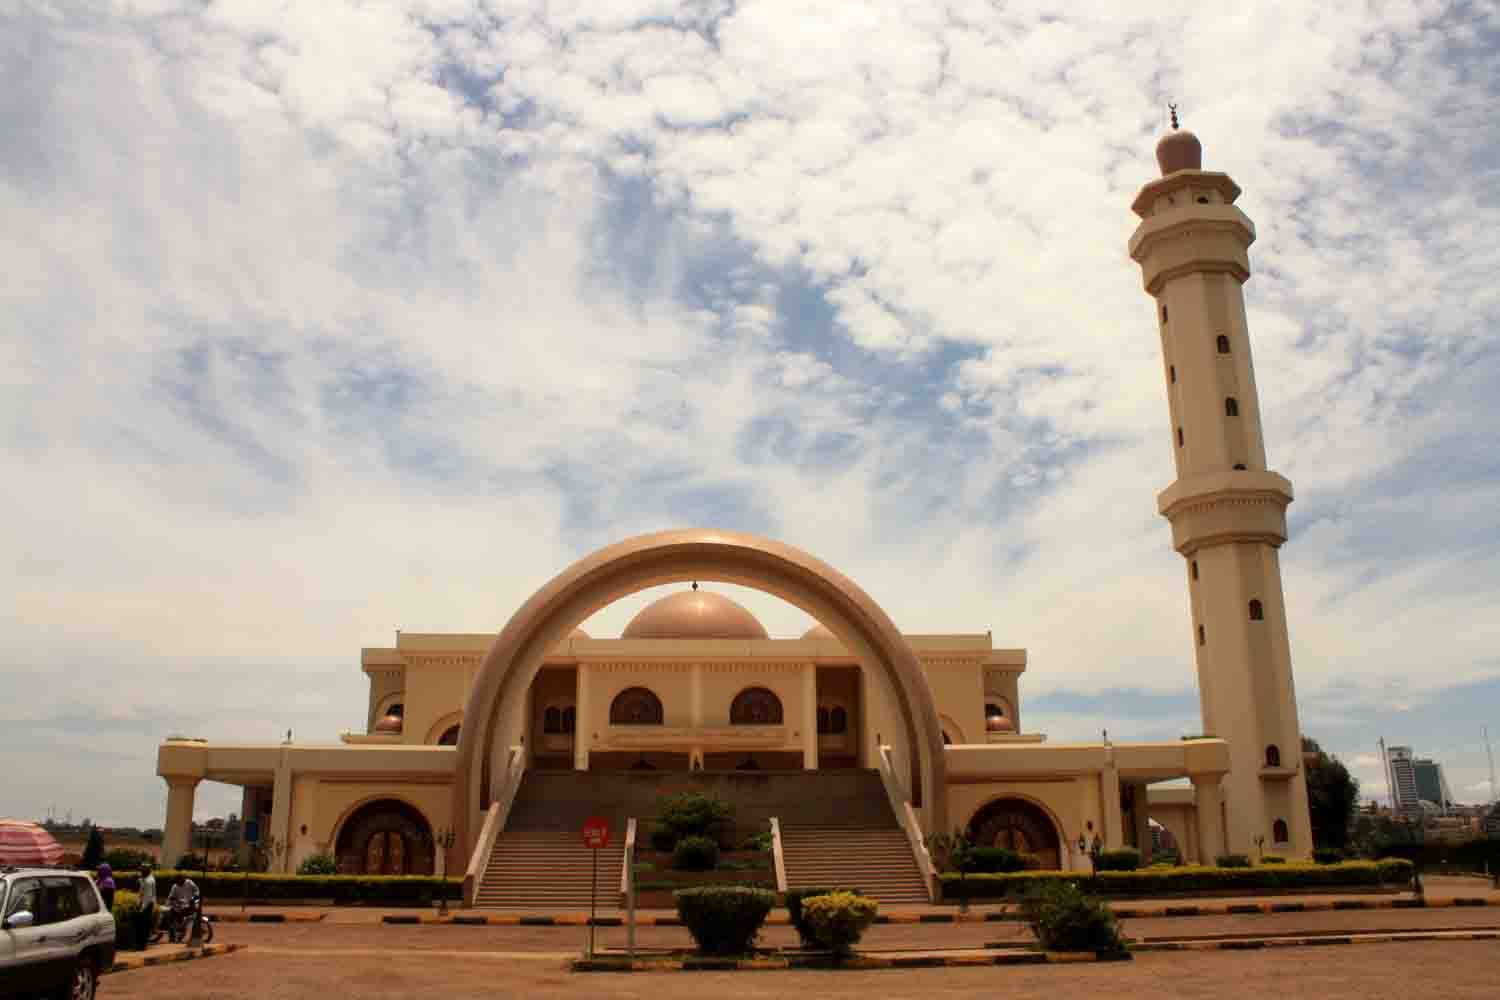 images/Places/ghaddafi-mosque-old-kampala.jpg